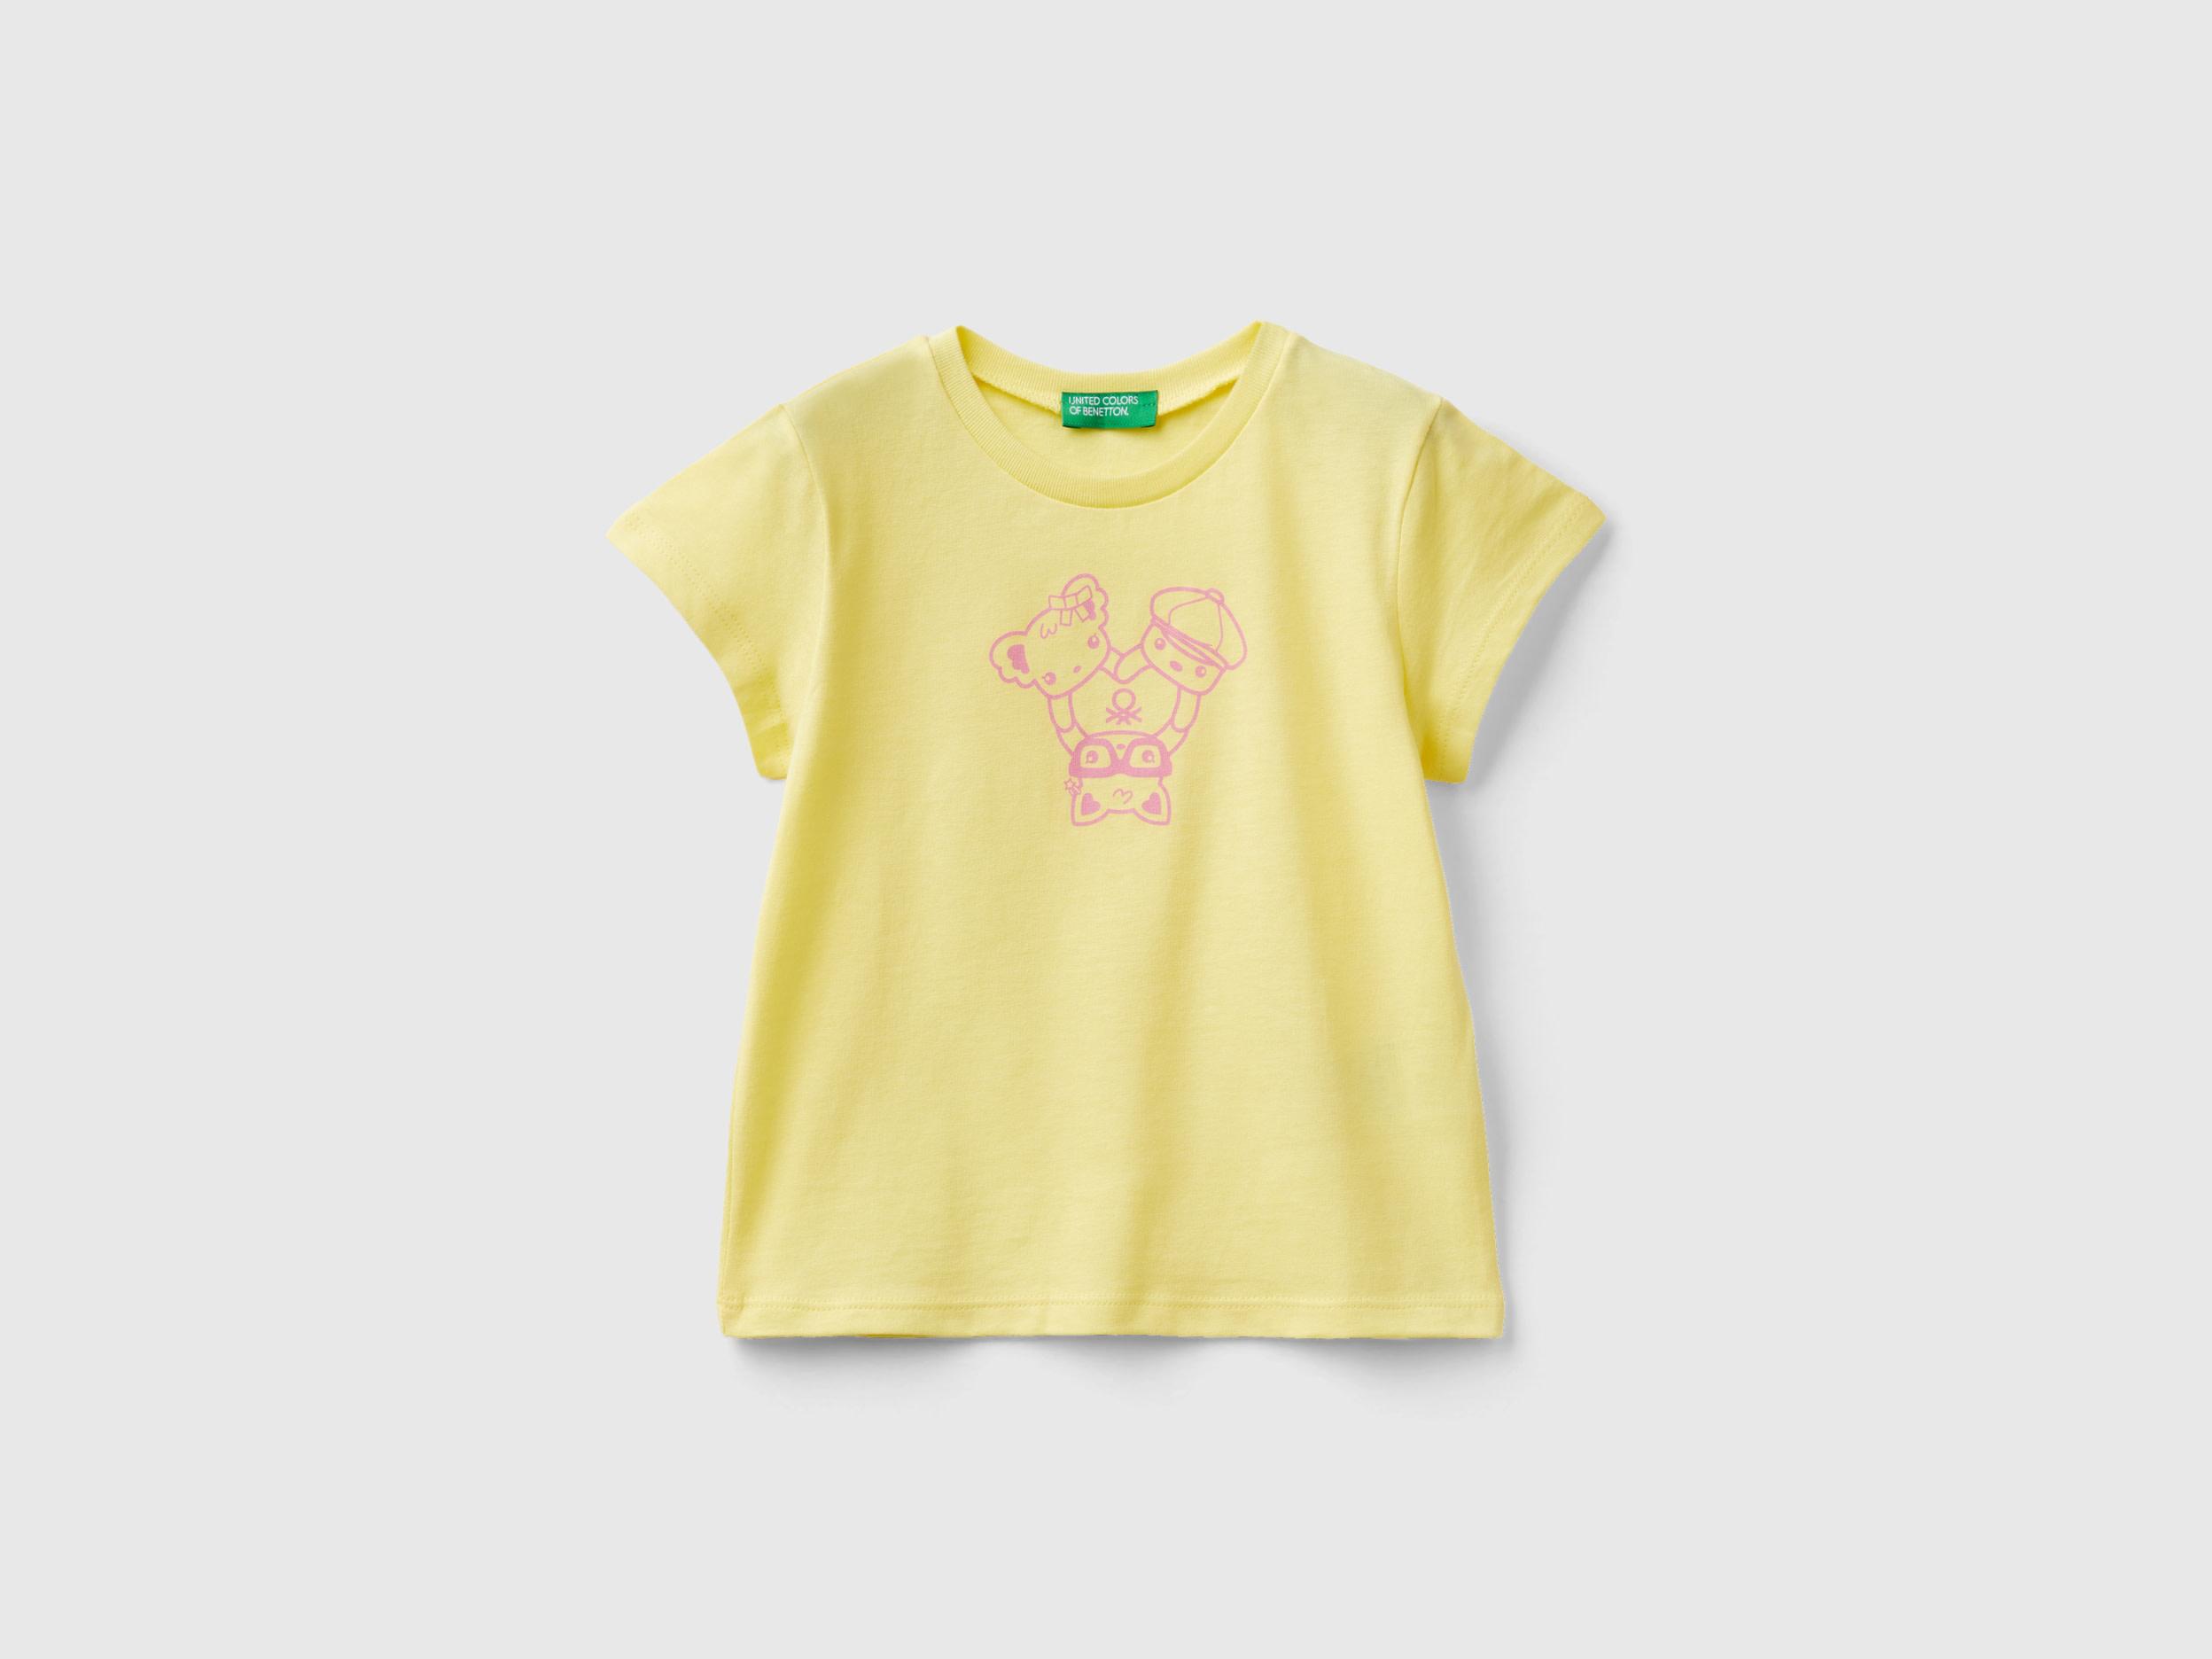 Image of Benetton, 100% Cotton T-shirt With Print, size 90, Yellow, Kids